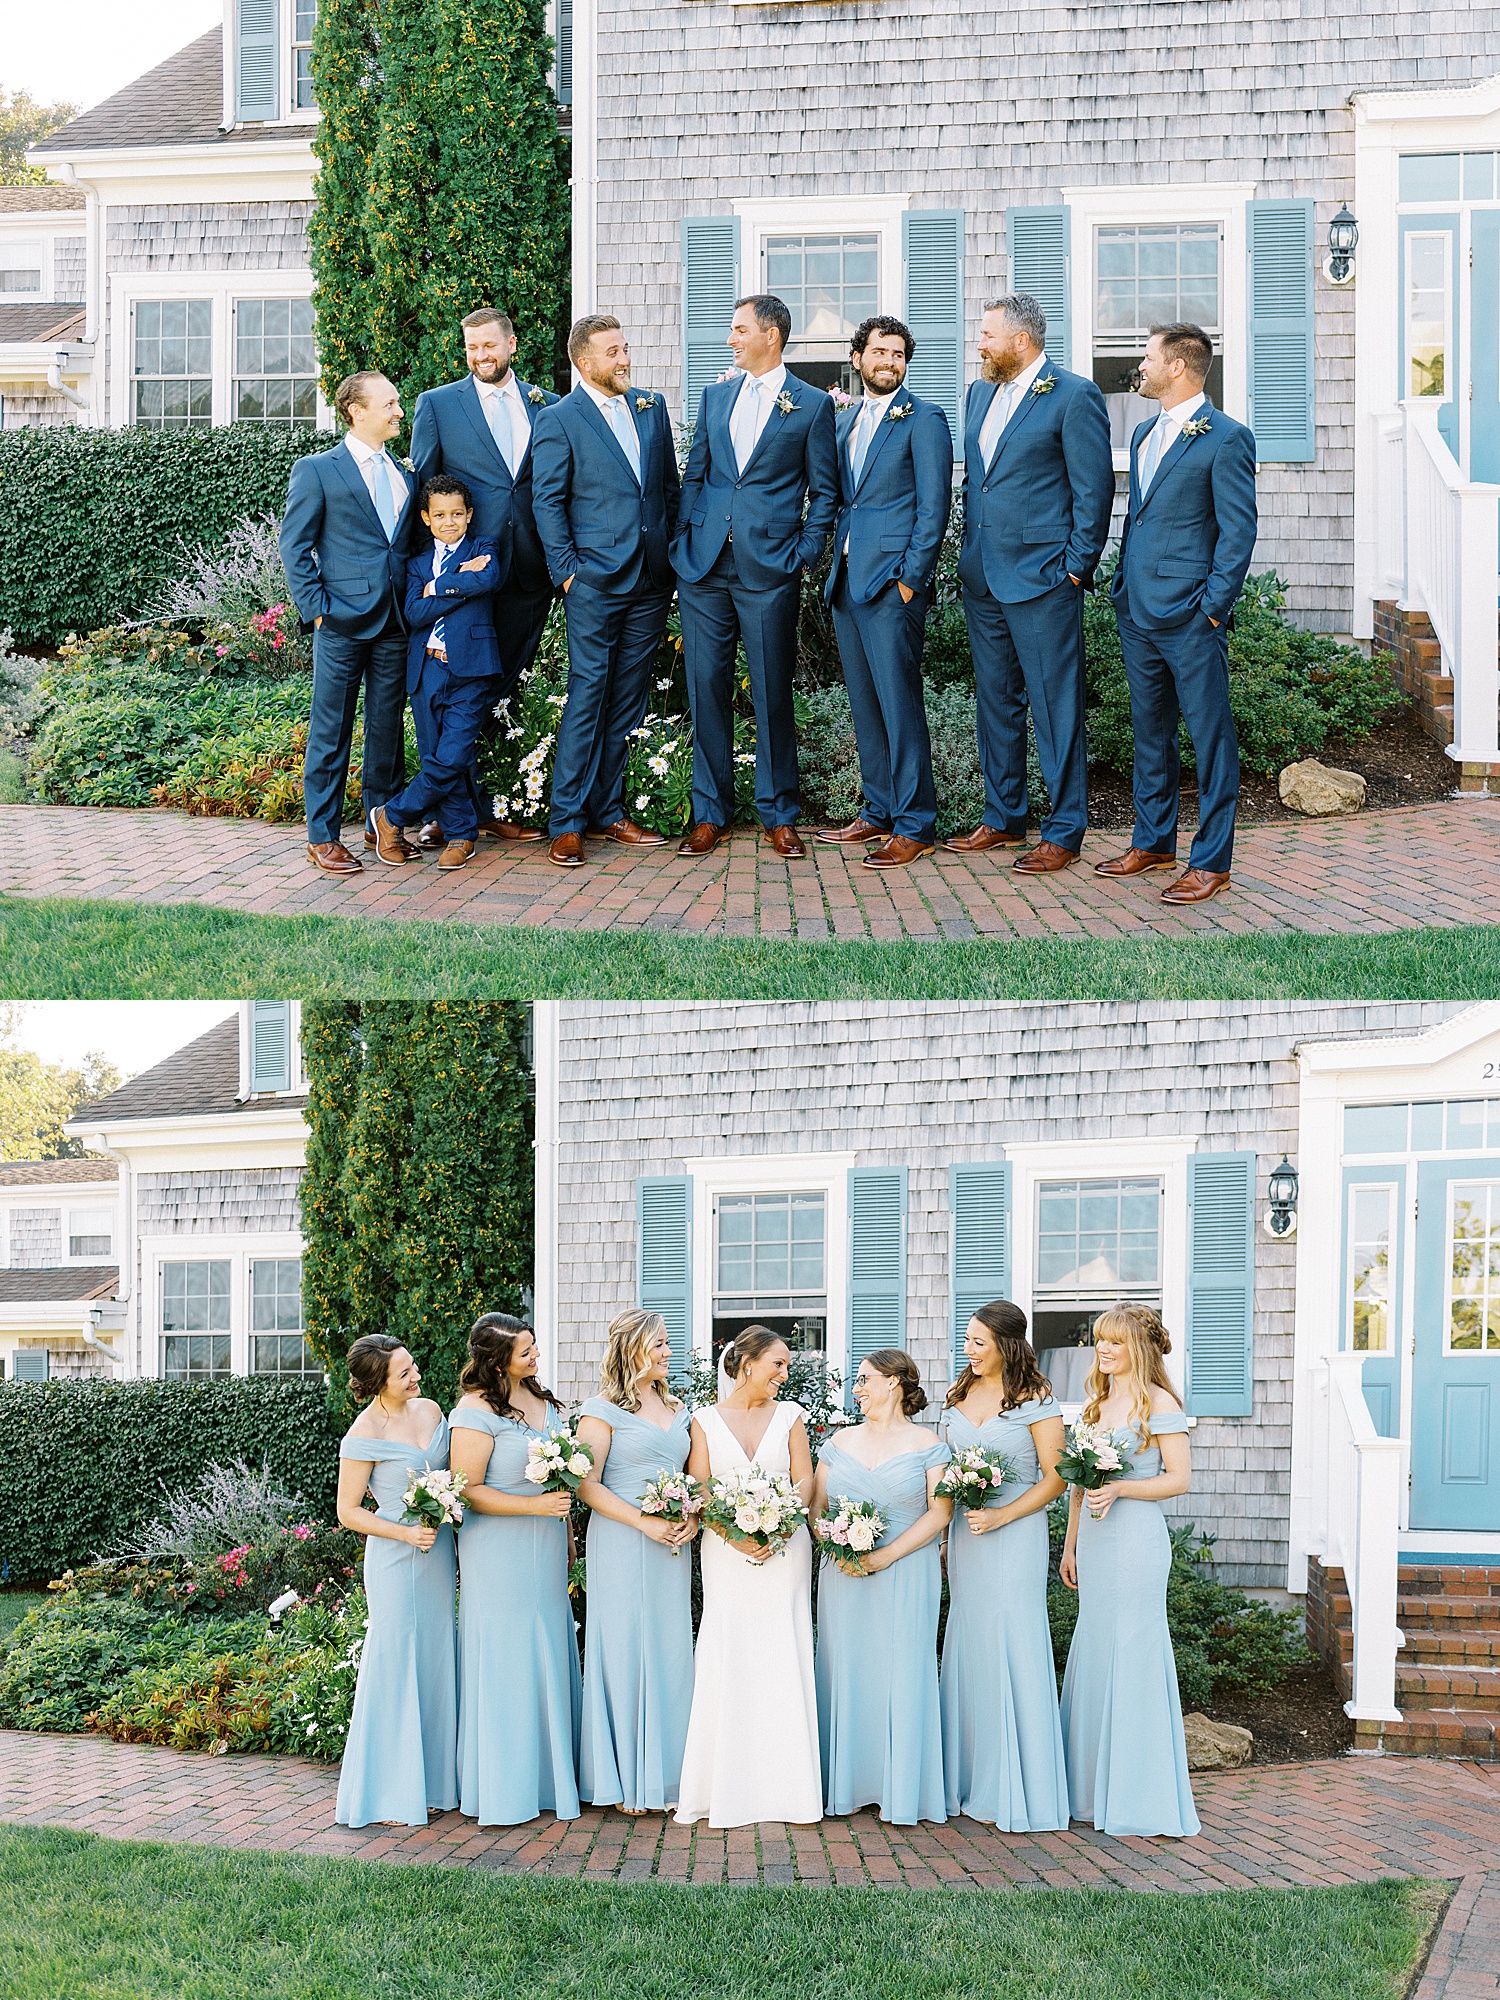 Bride and groom with their wedding parties in blue at their Dennis Inn Wedding